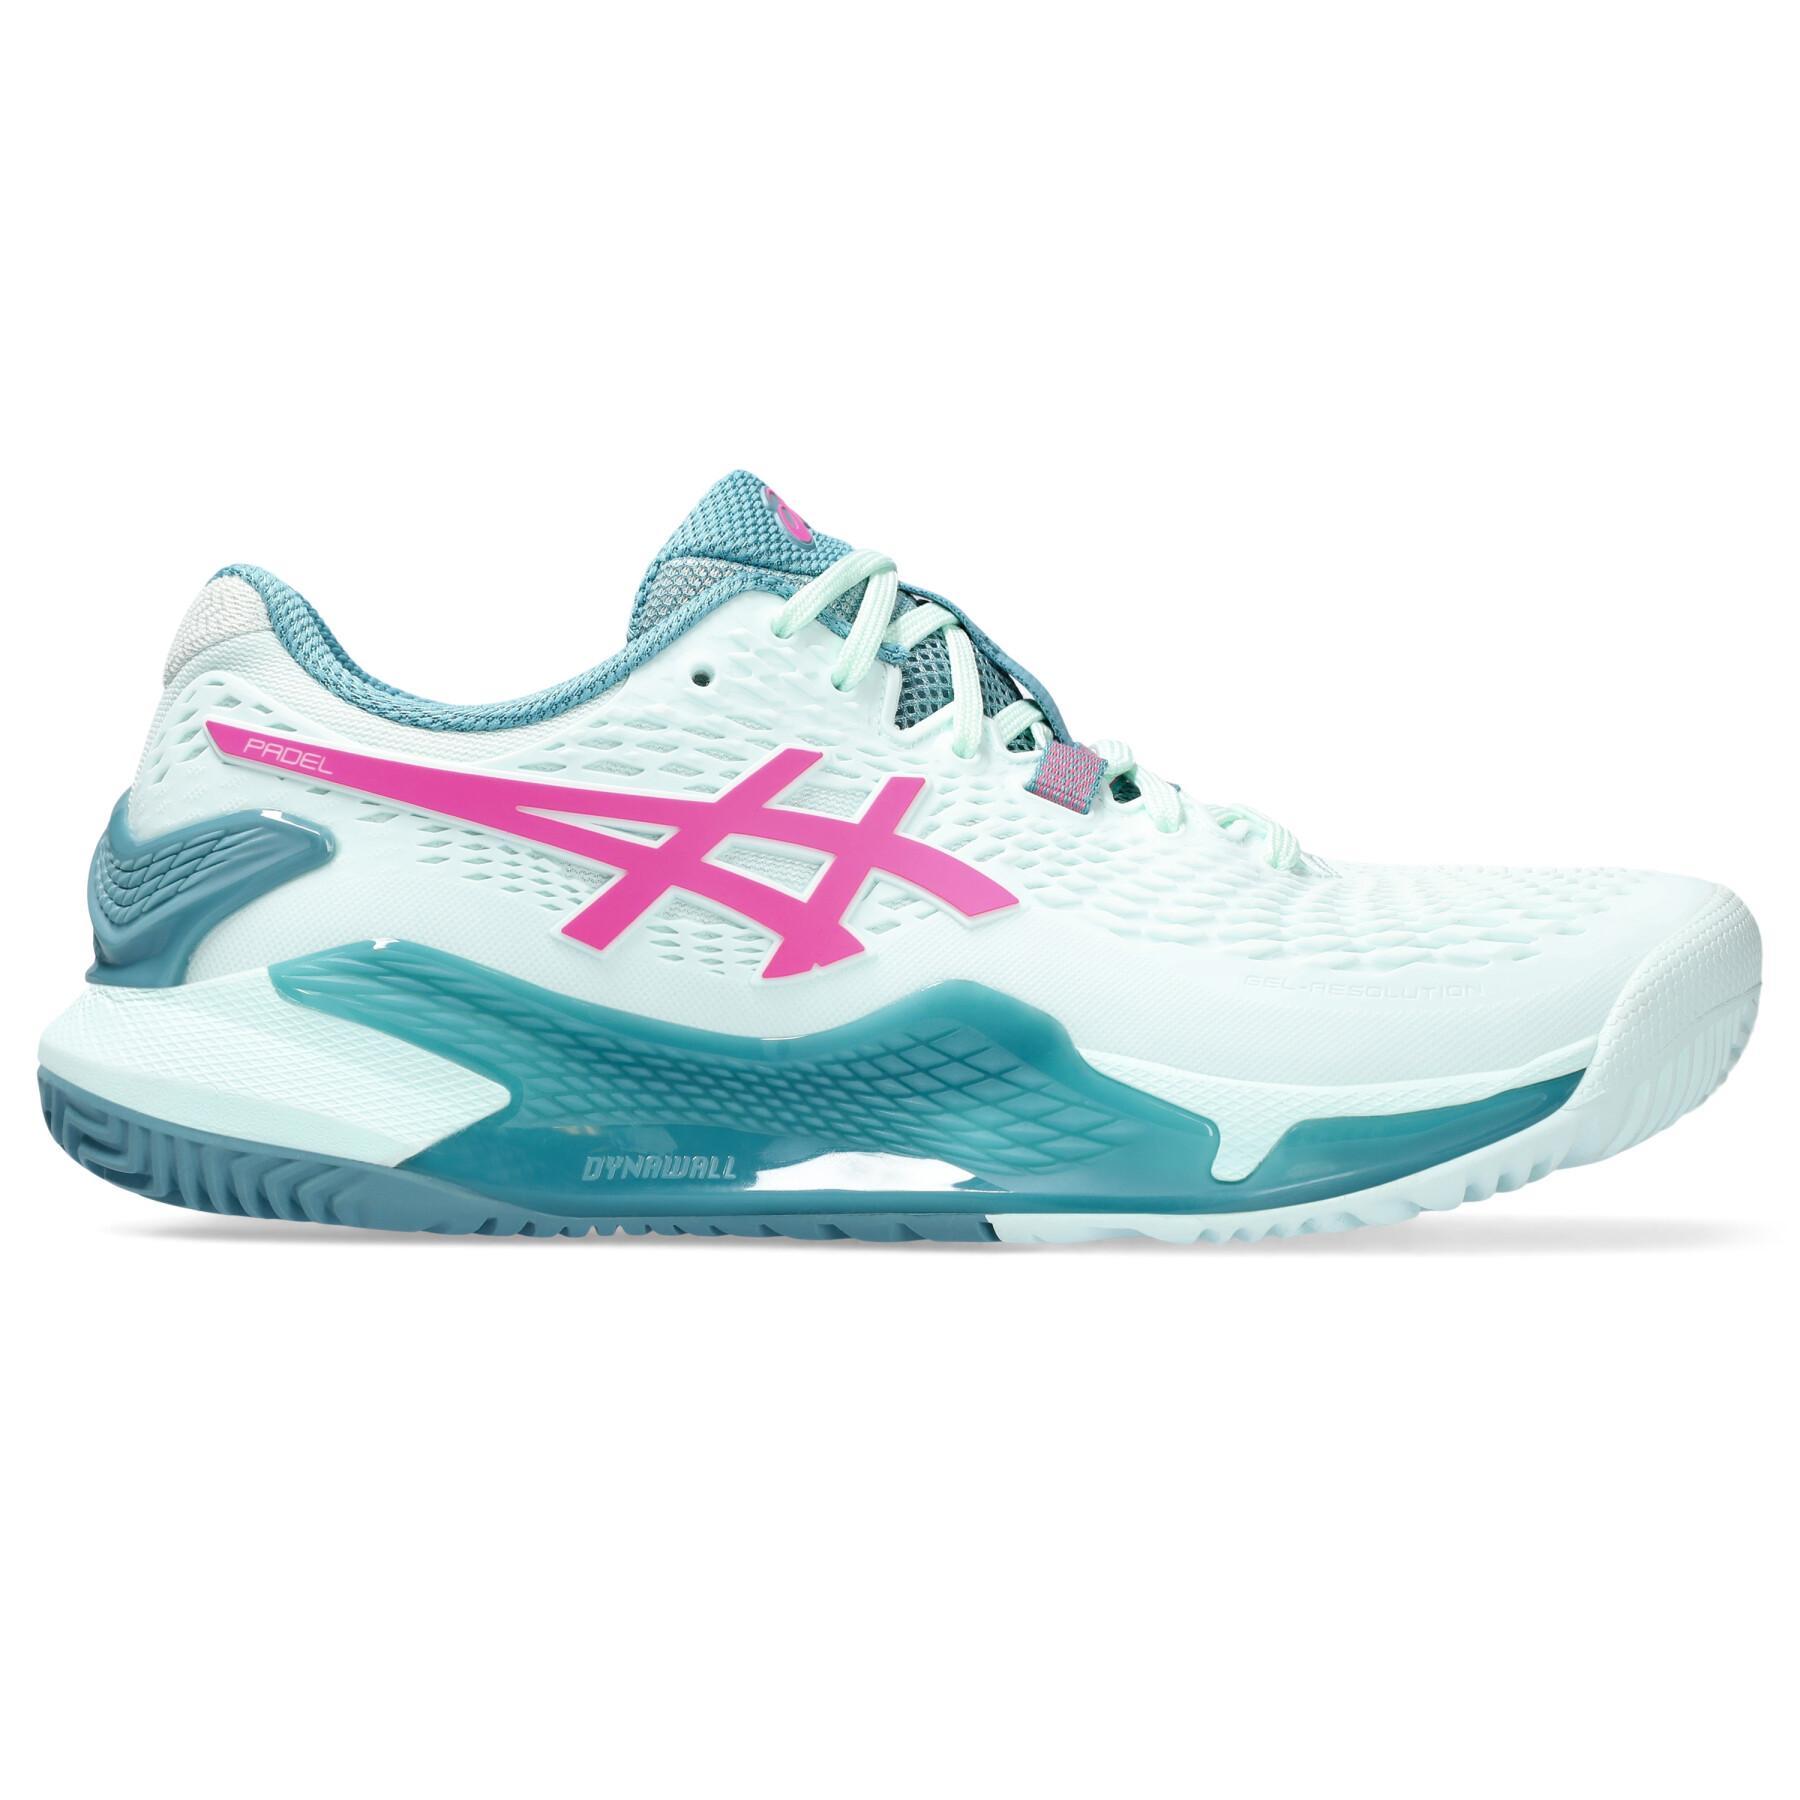 Women's paddle shoes Asics Gel-Resolution 9